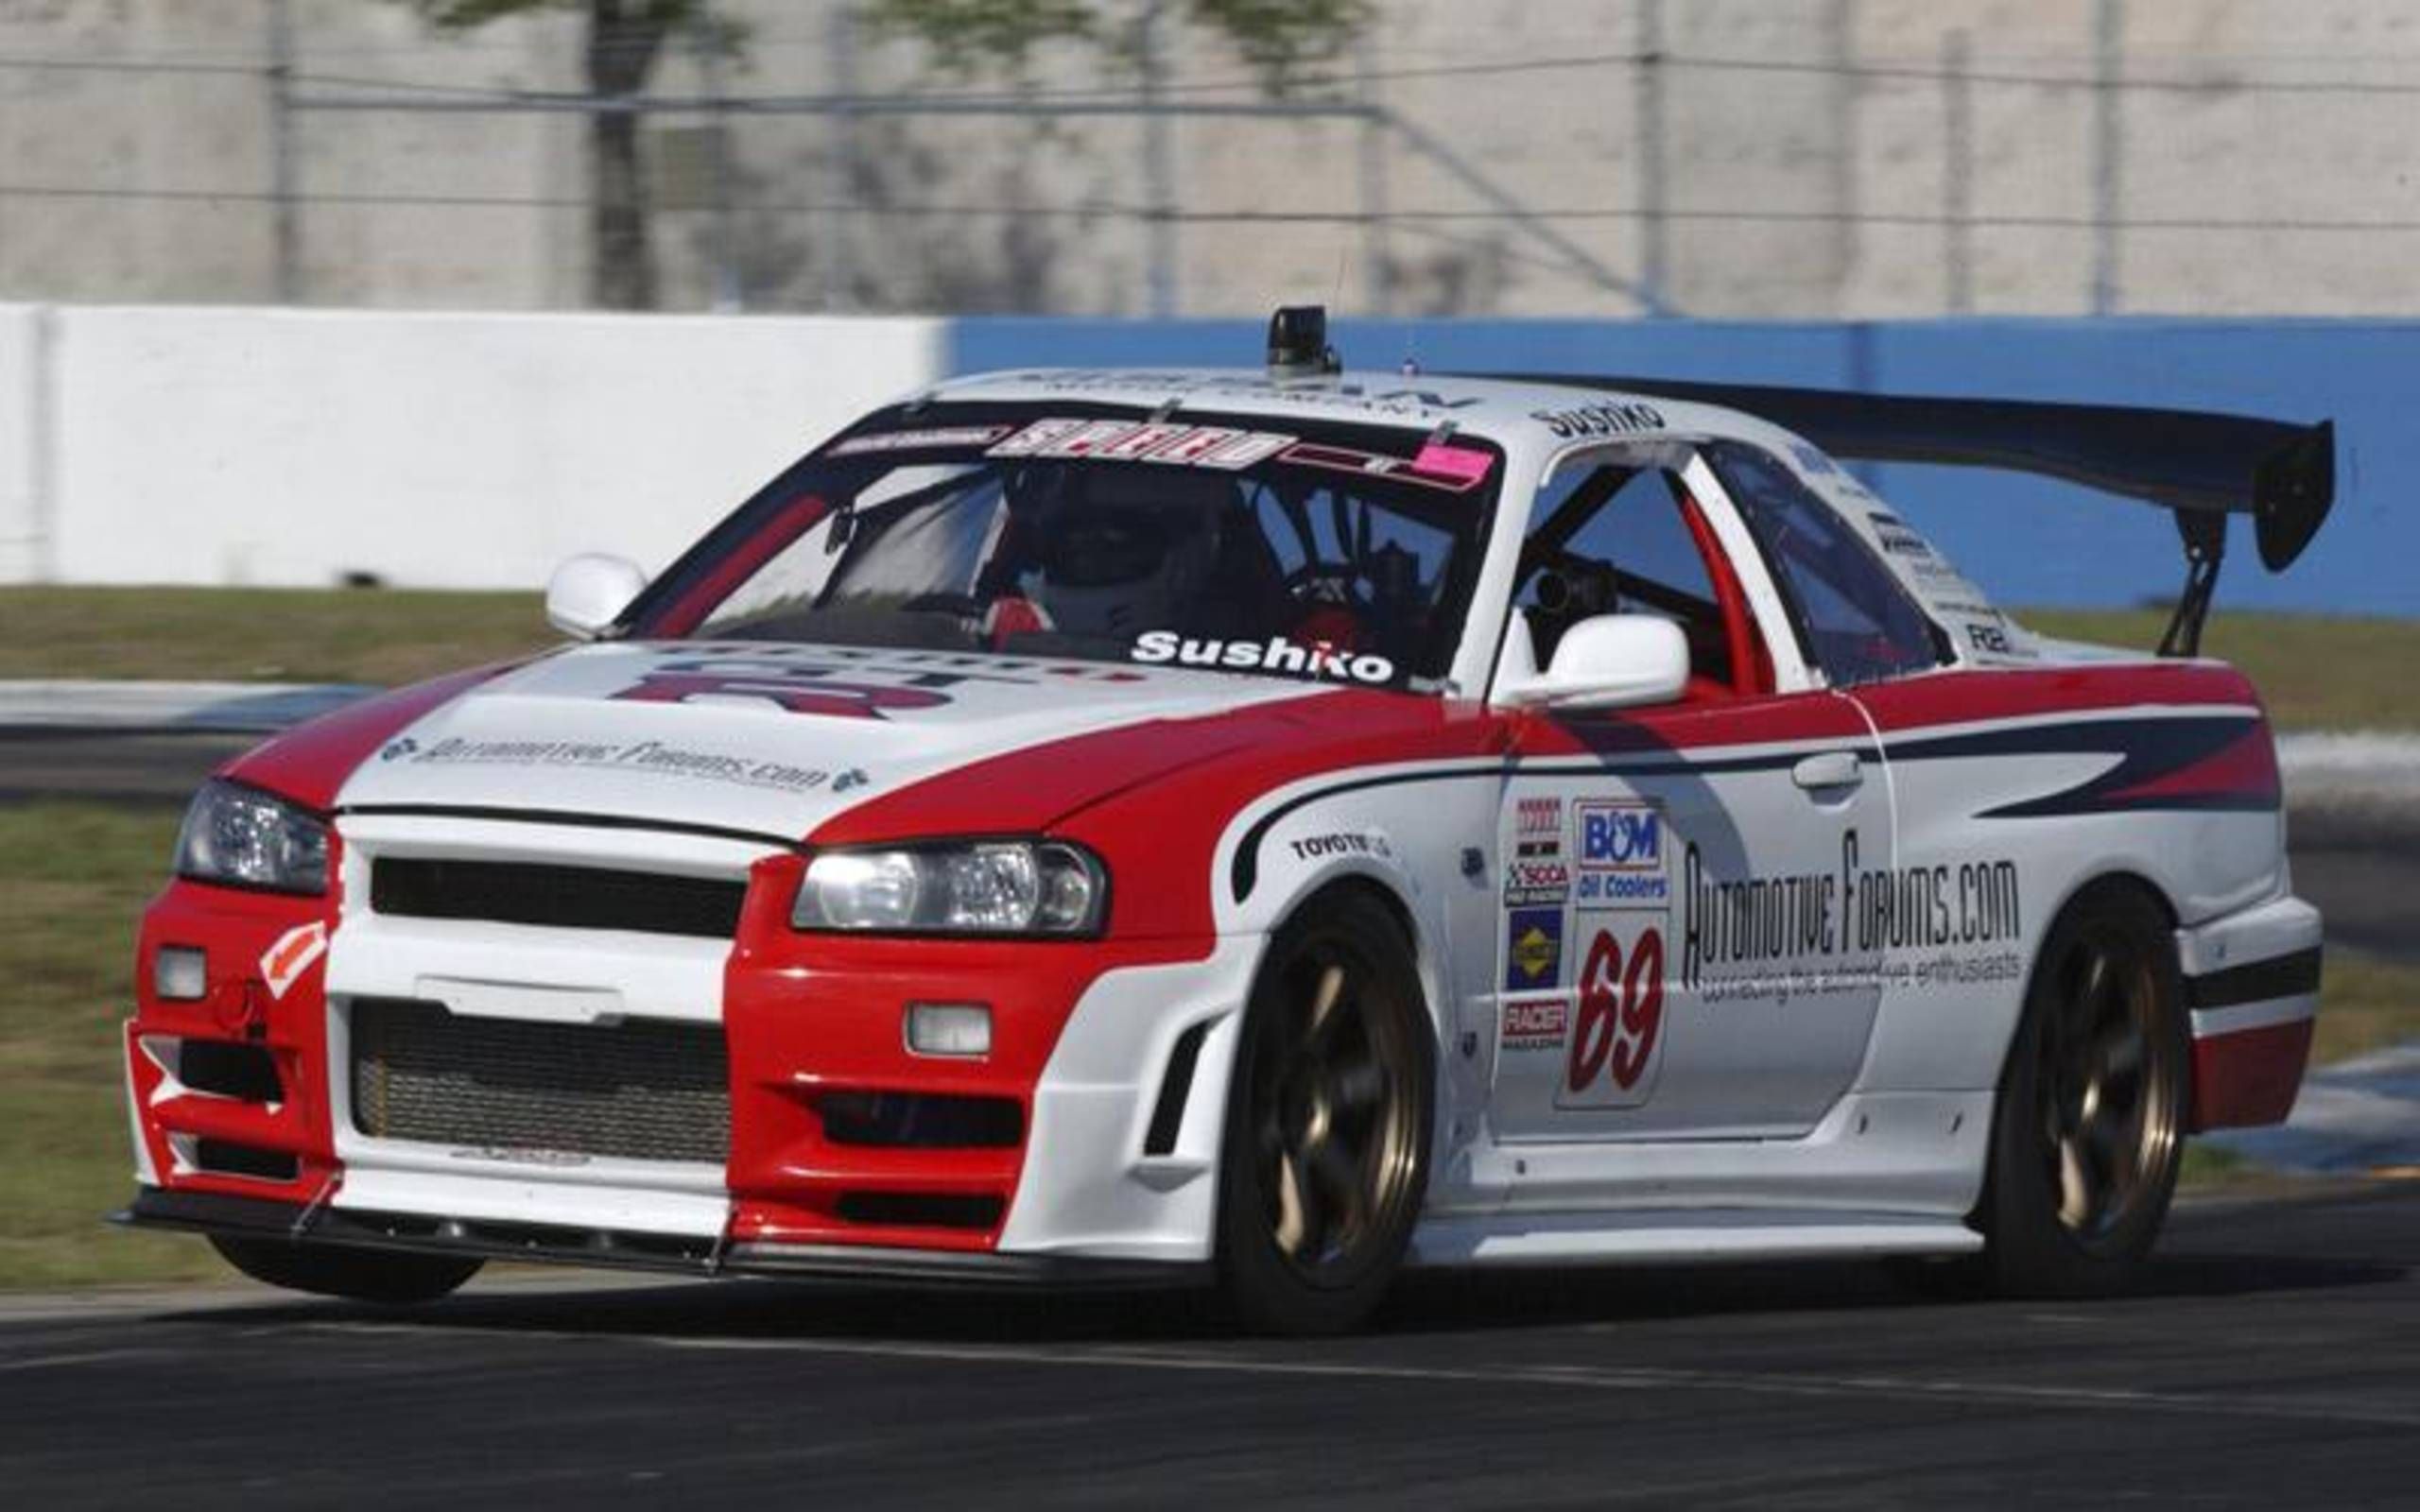 R34 Nissan Skyline GT-R: Most young sport compact tuners have big